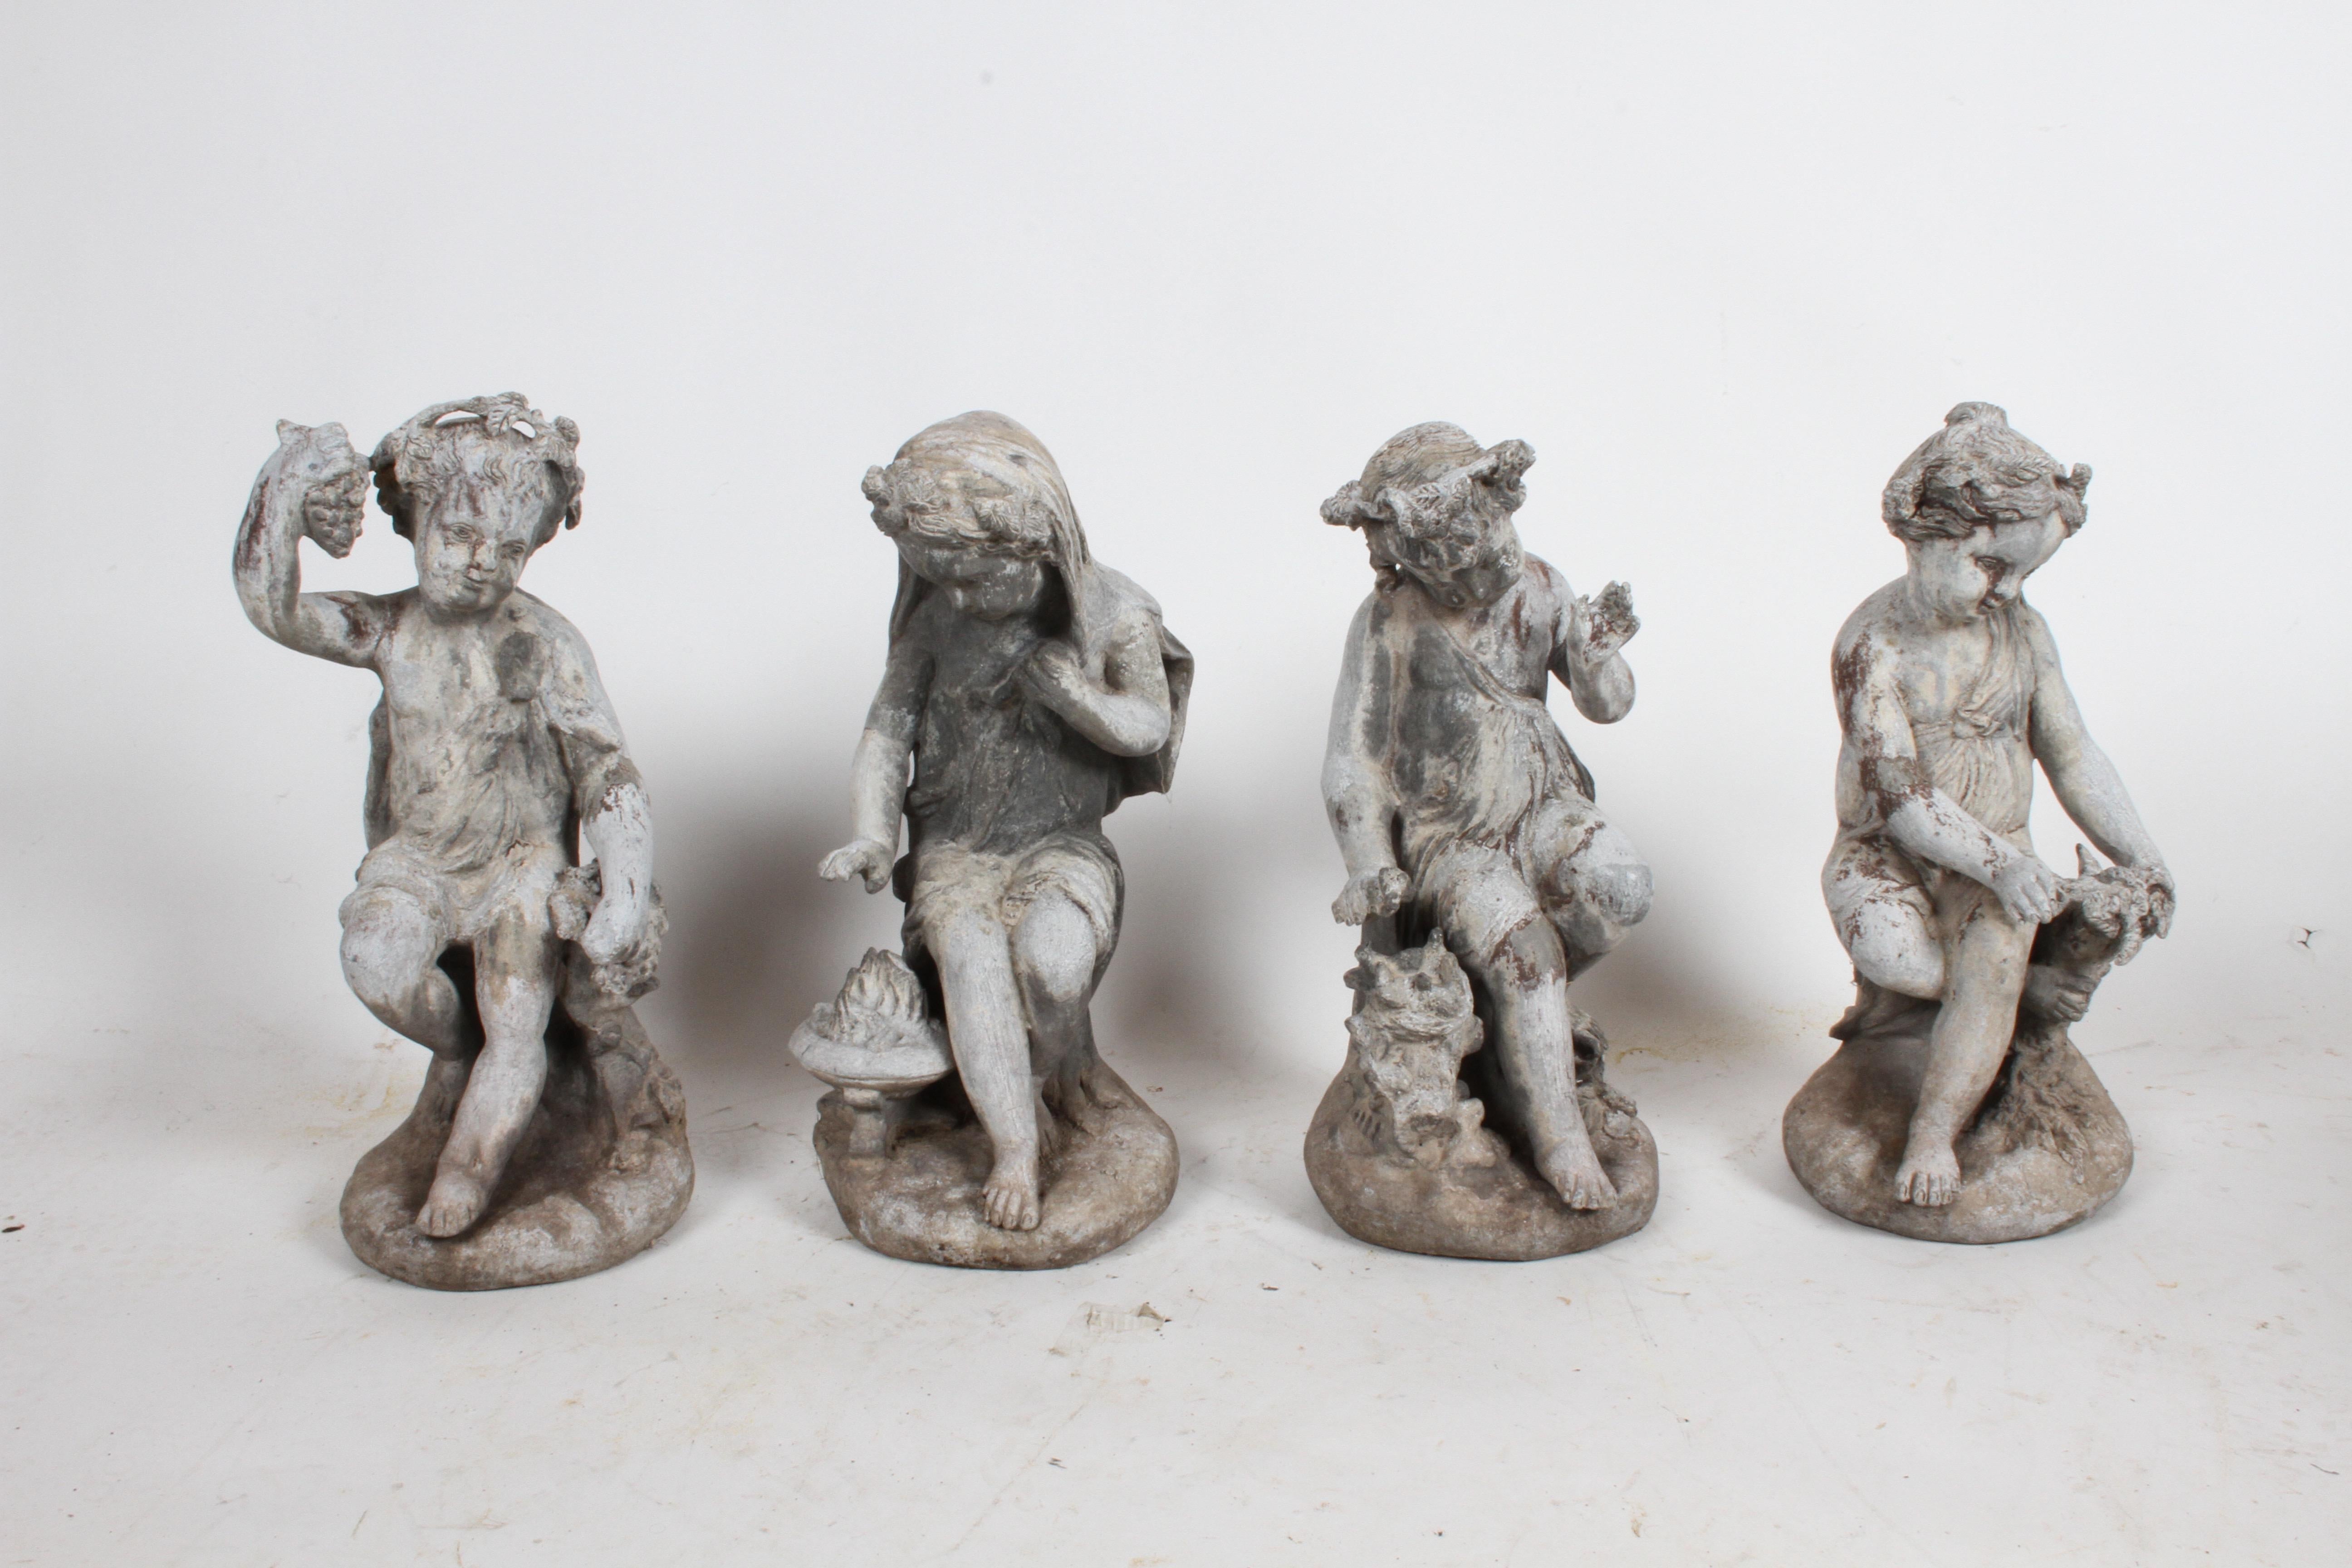 Complete set of antique English garden Four Seasons lead figures, late 19th or early 20th century. Four lead cast children, two girls and two boys, spring: feeding baby birds, summer: with grapes, fall: with wheat and winter: in a robe with a fire